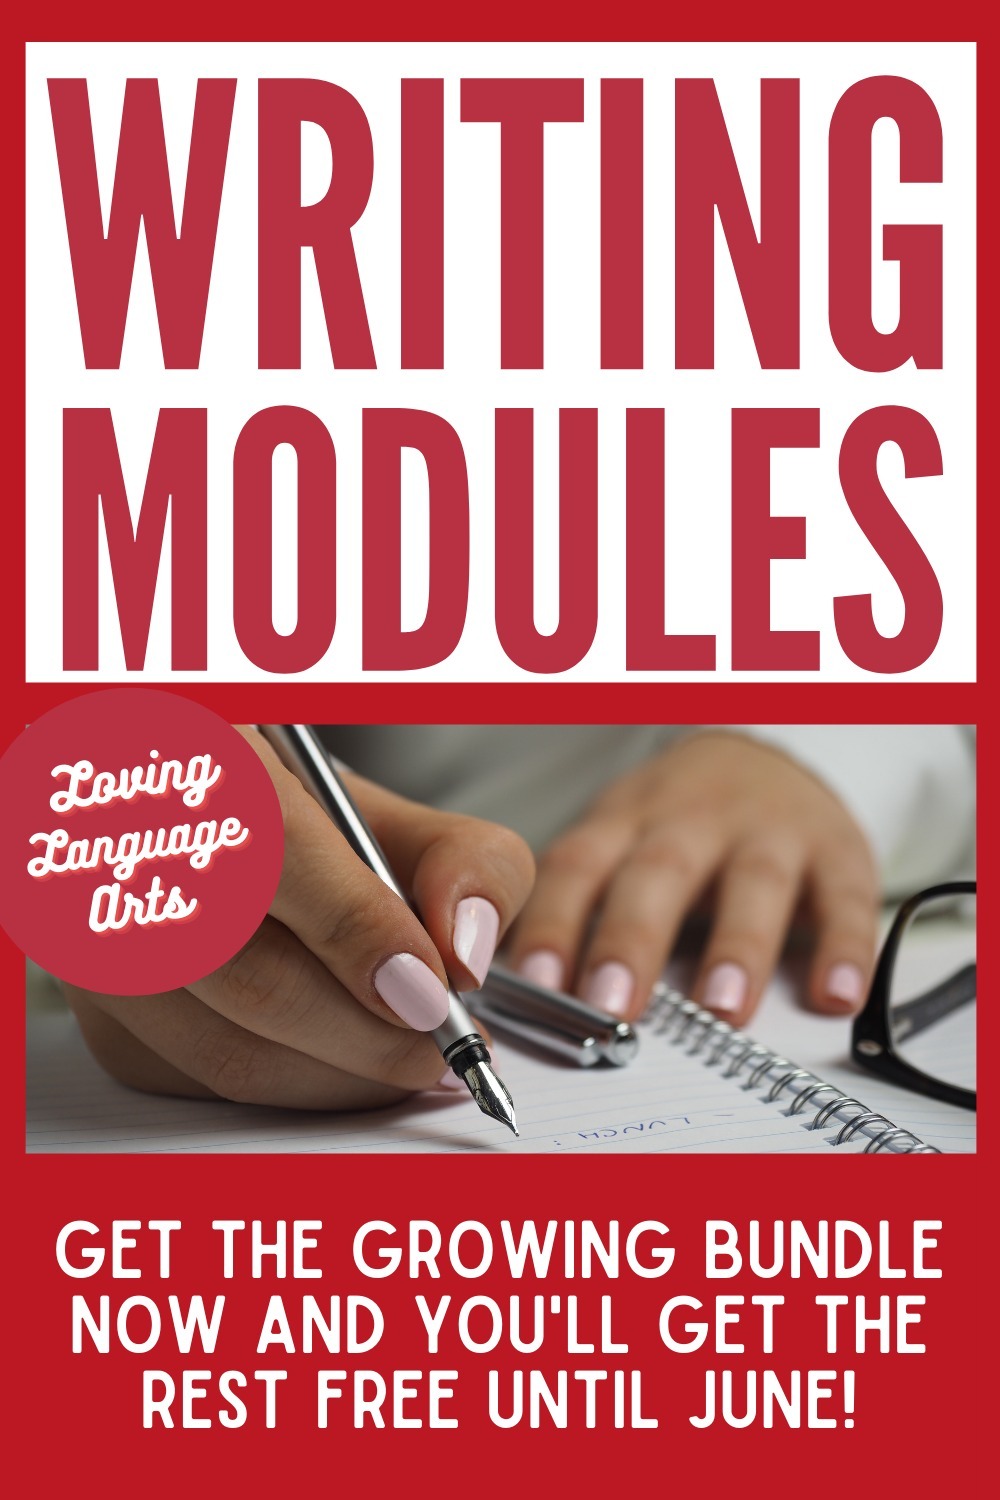 ad for writing modules writing test prep